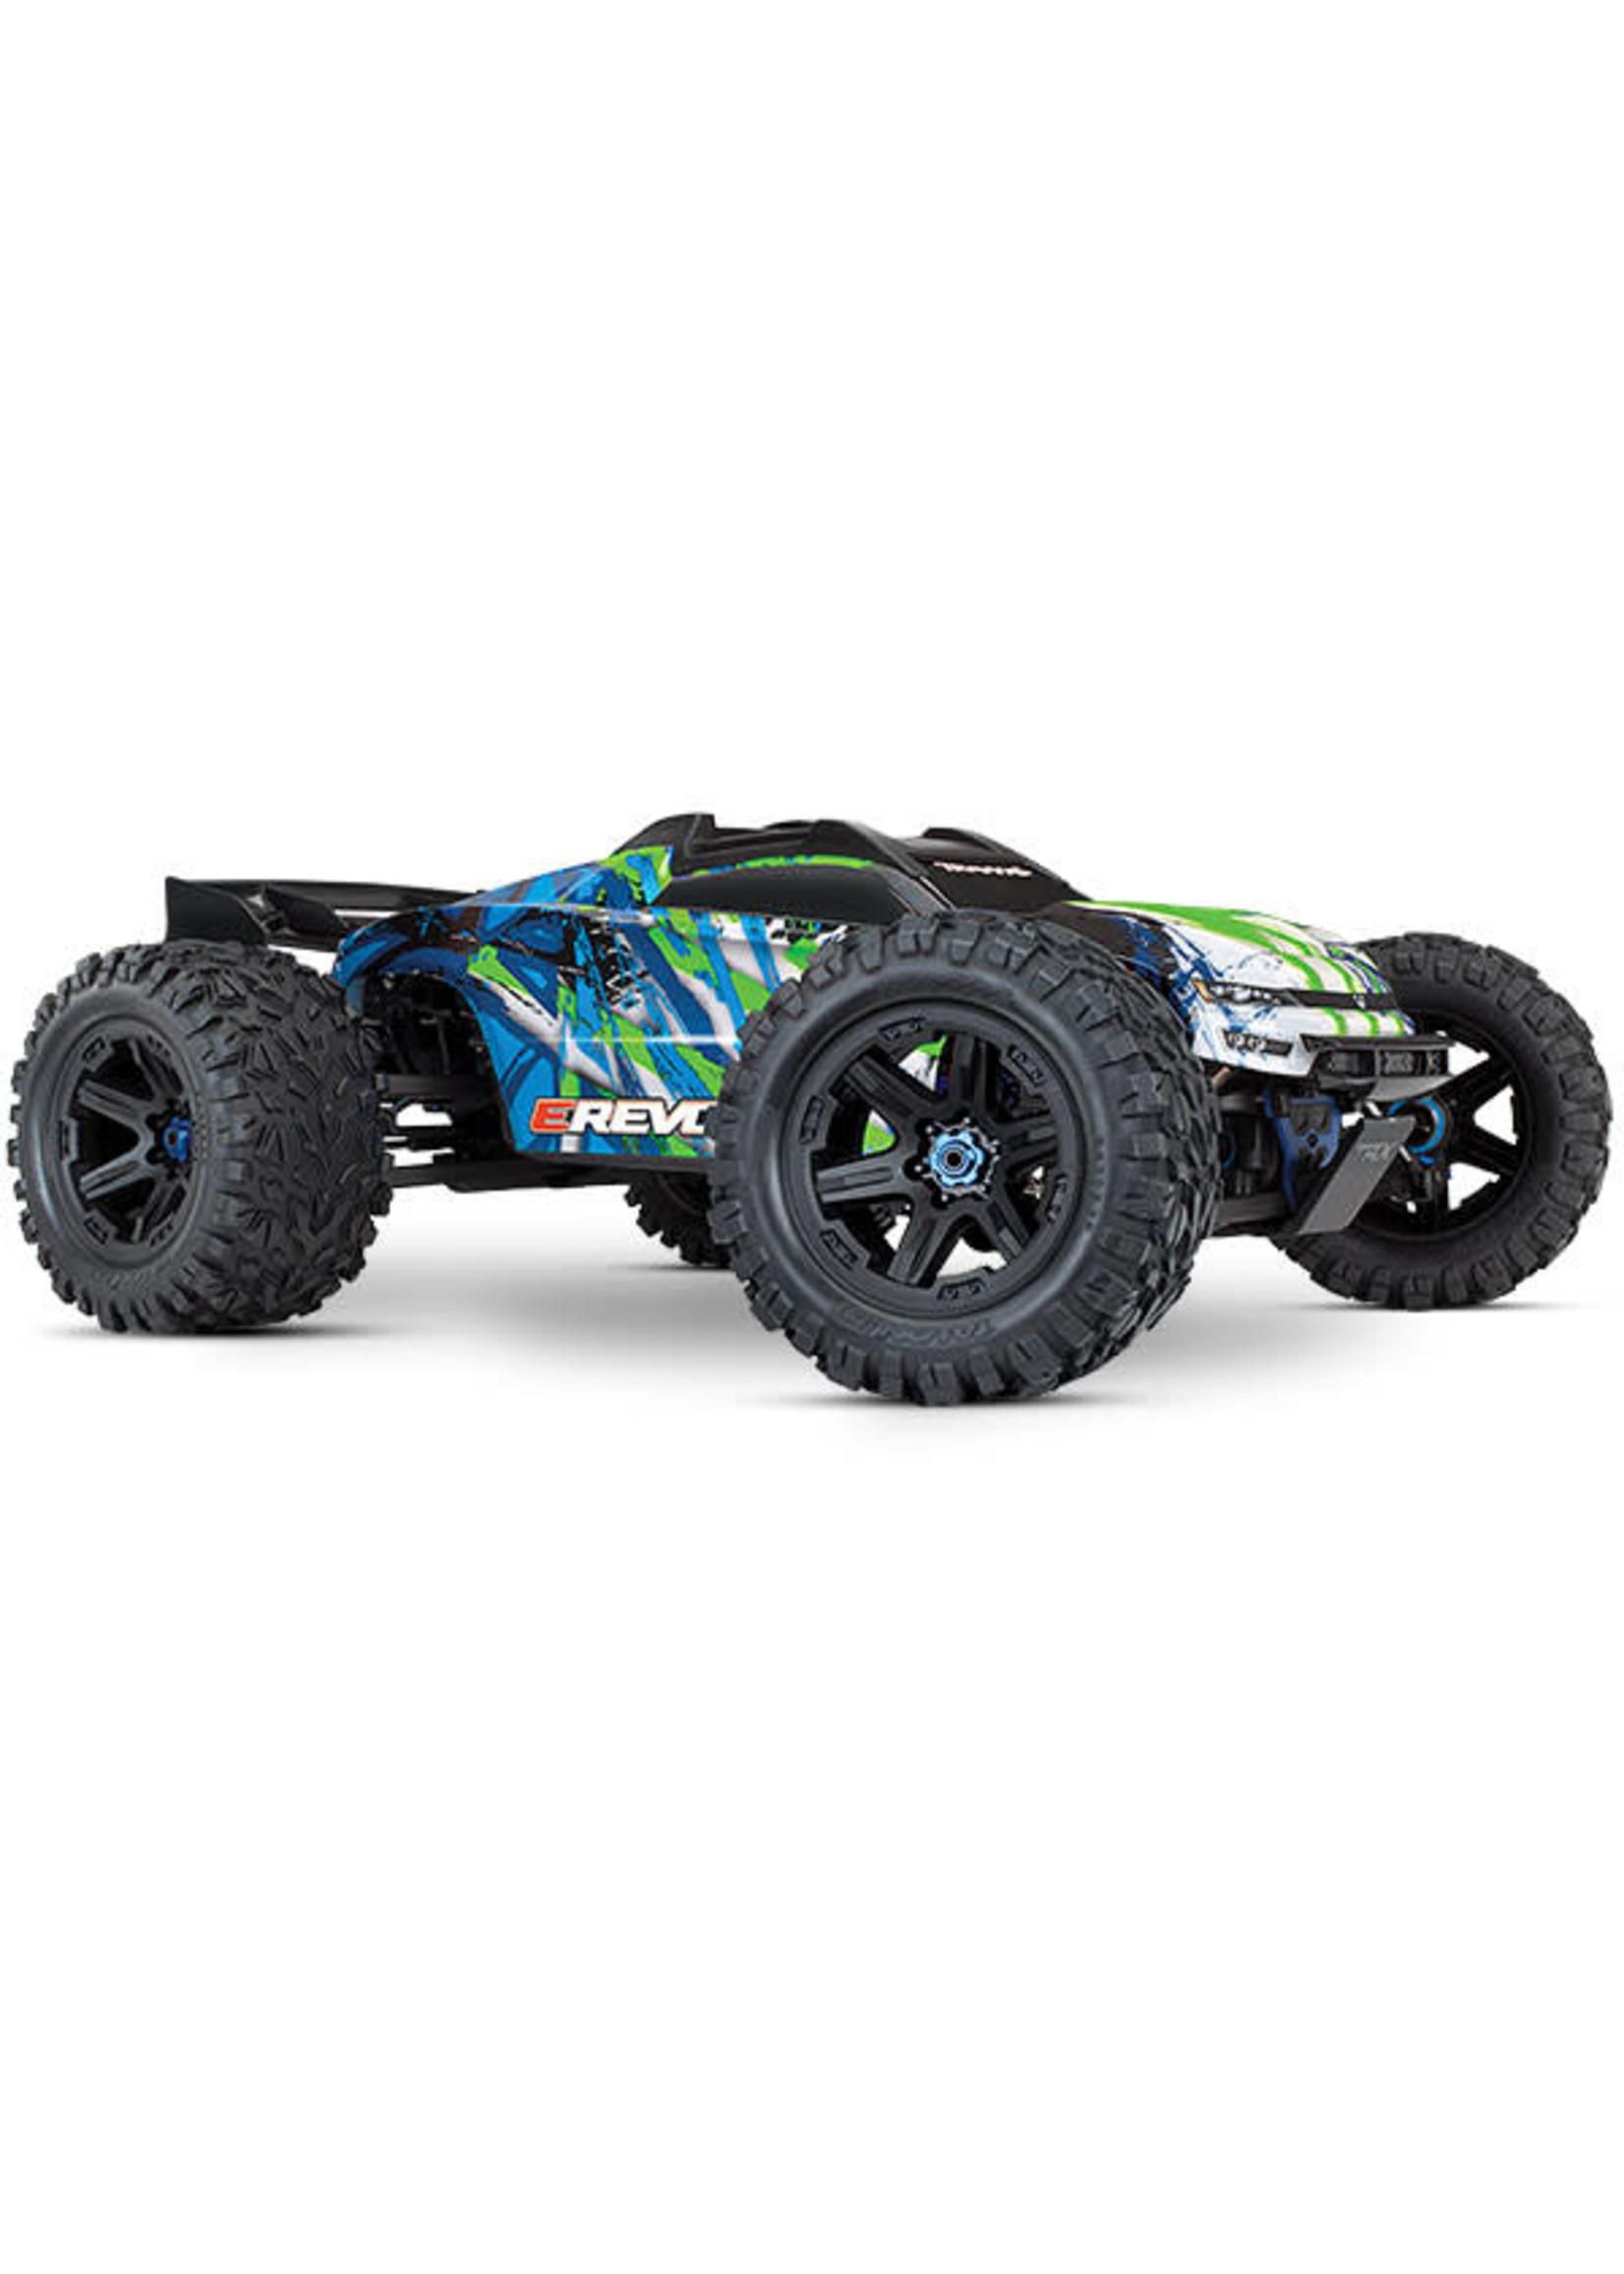 Traxxas TRA86086-4 Traxxas E-Revo VXL Brushless: 1/10 Scale 4WD Brushless Electric Monster Truck with TQi 2.4Ghz Traxxas Link Enabled Radio System And Traxxas Stability Management (TSM)